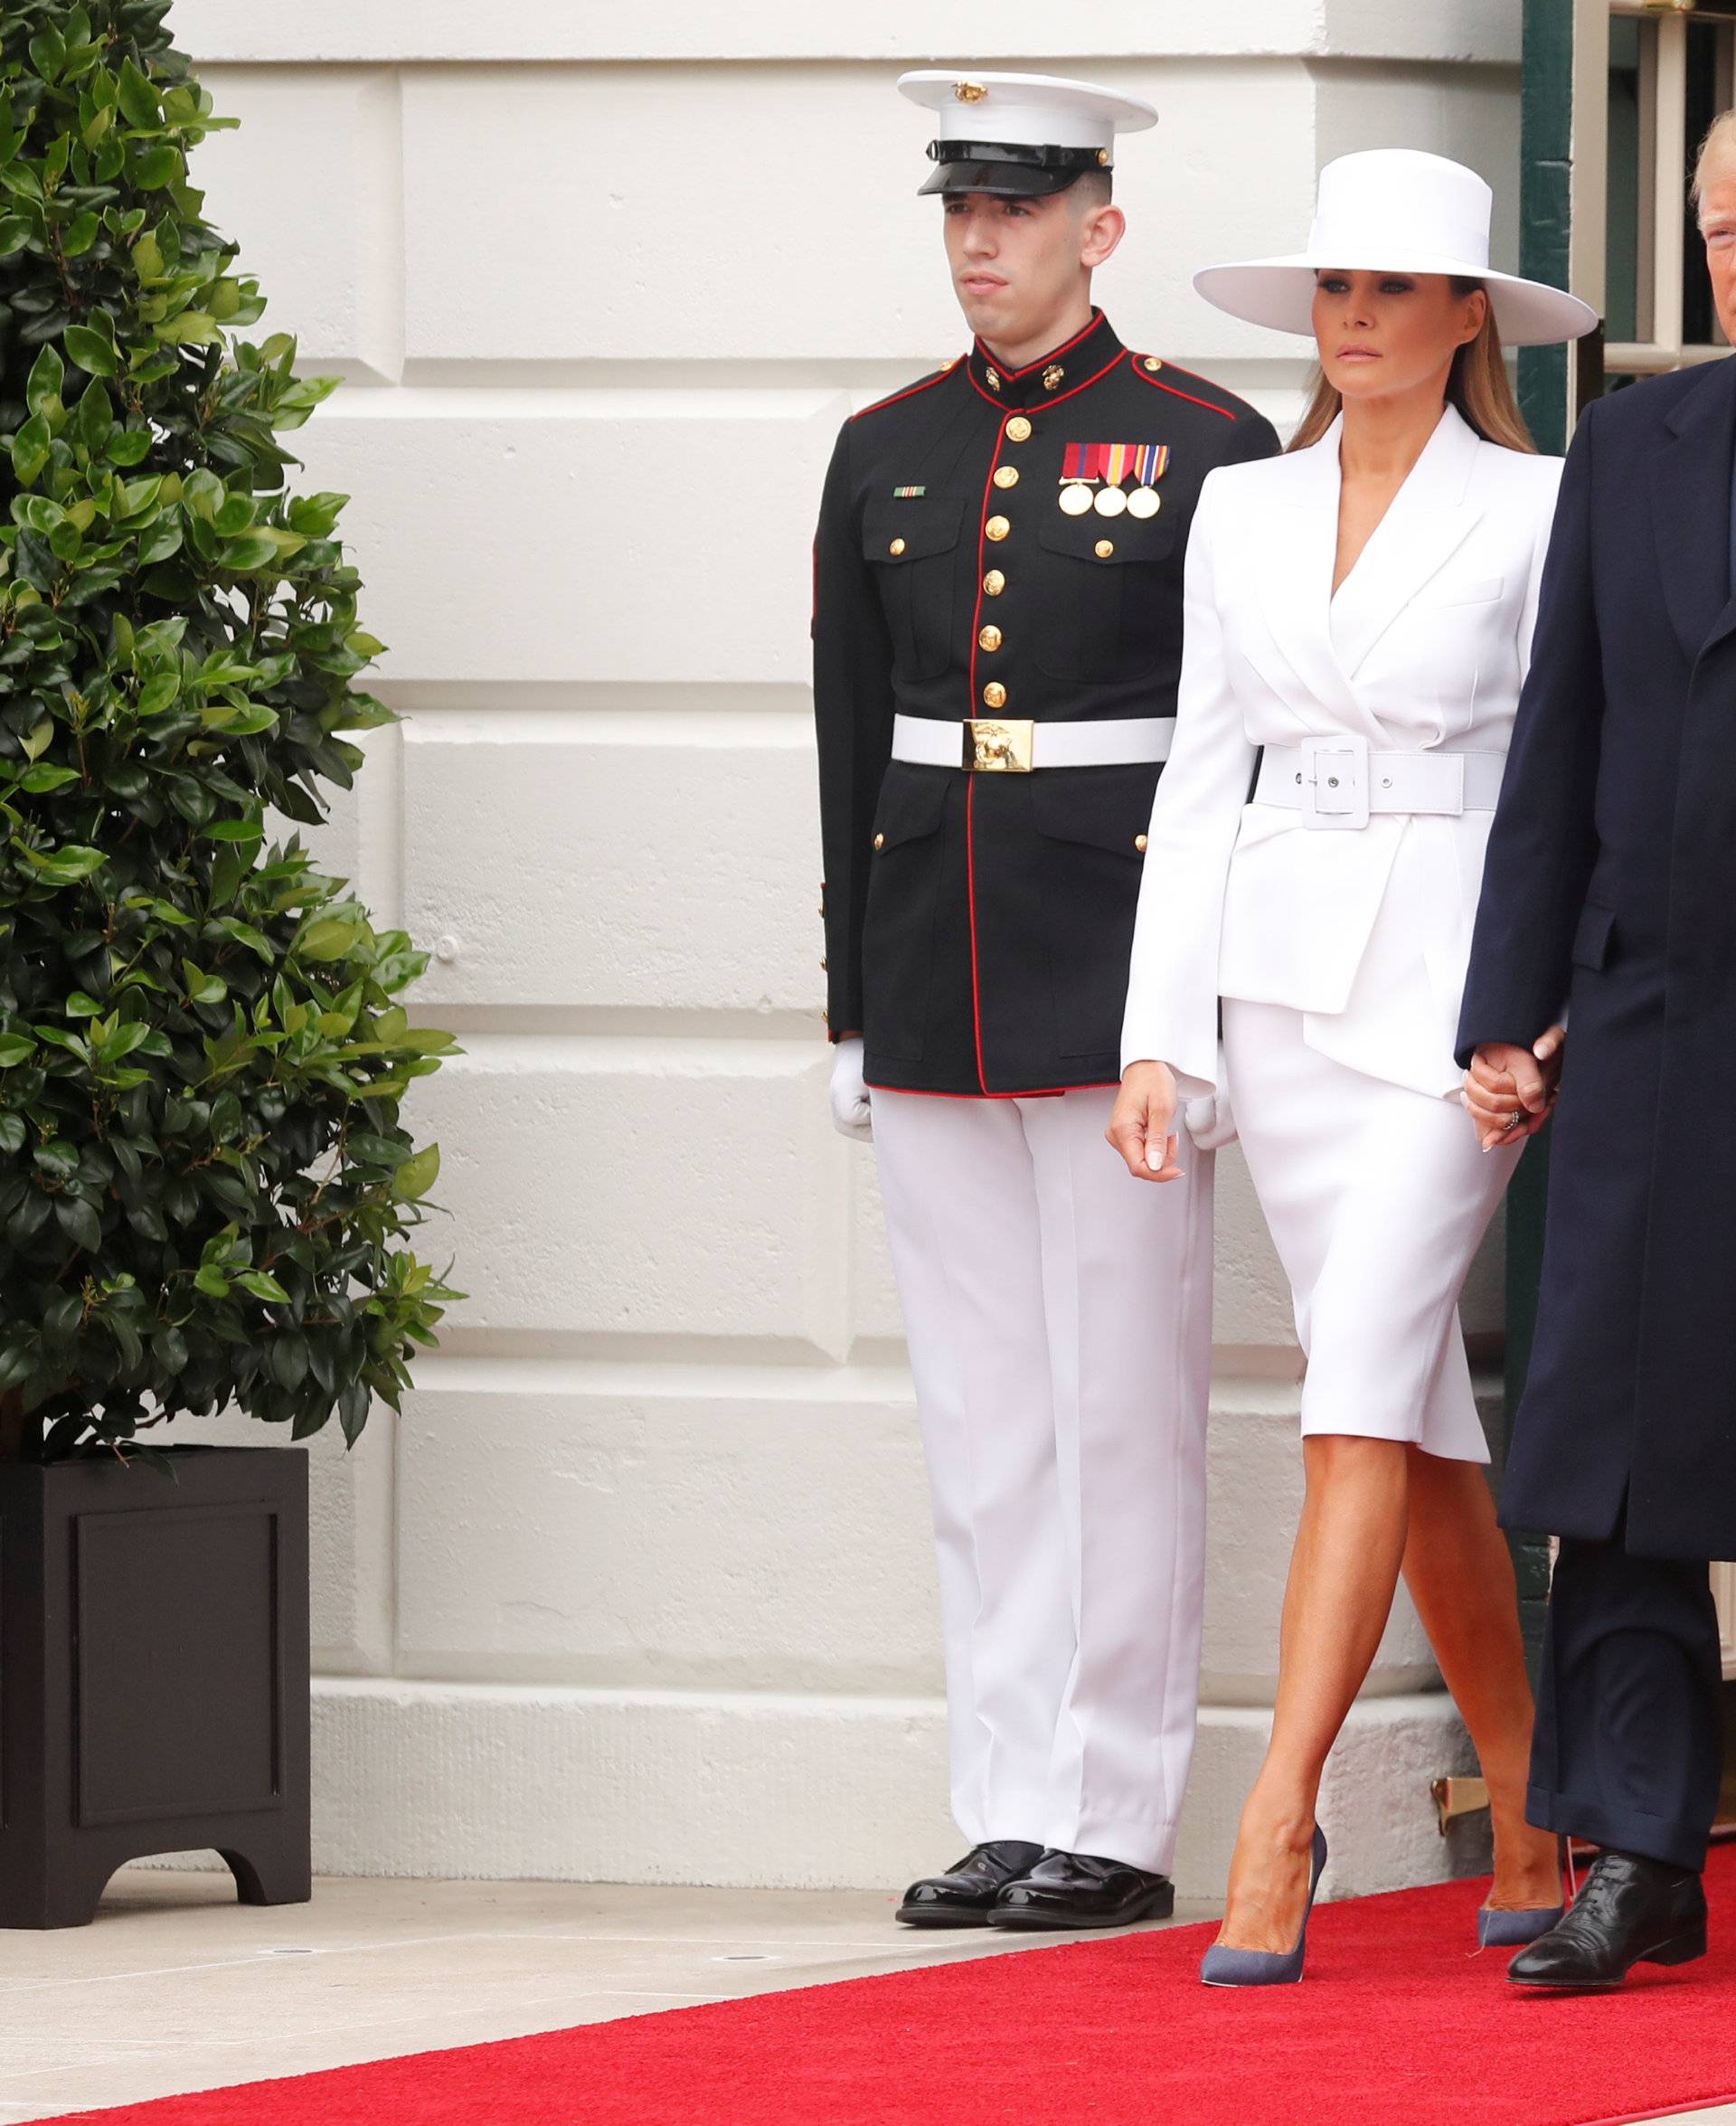 U.S. President Donald Trump and first lady Melania Trump welcome French President Emmanuel Macron and his wife Brigitte Macron during an arrival ceremony at the White House in Washington